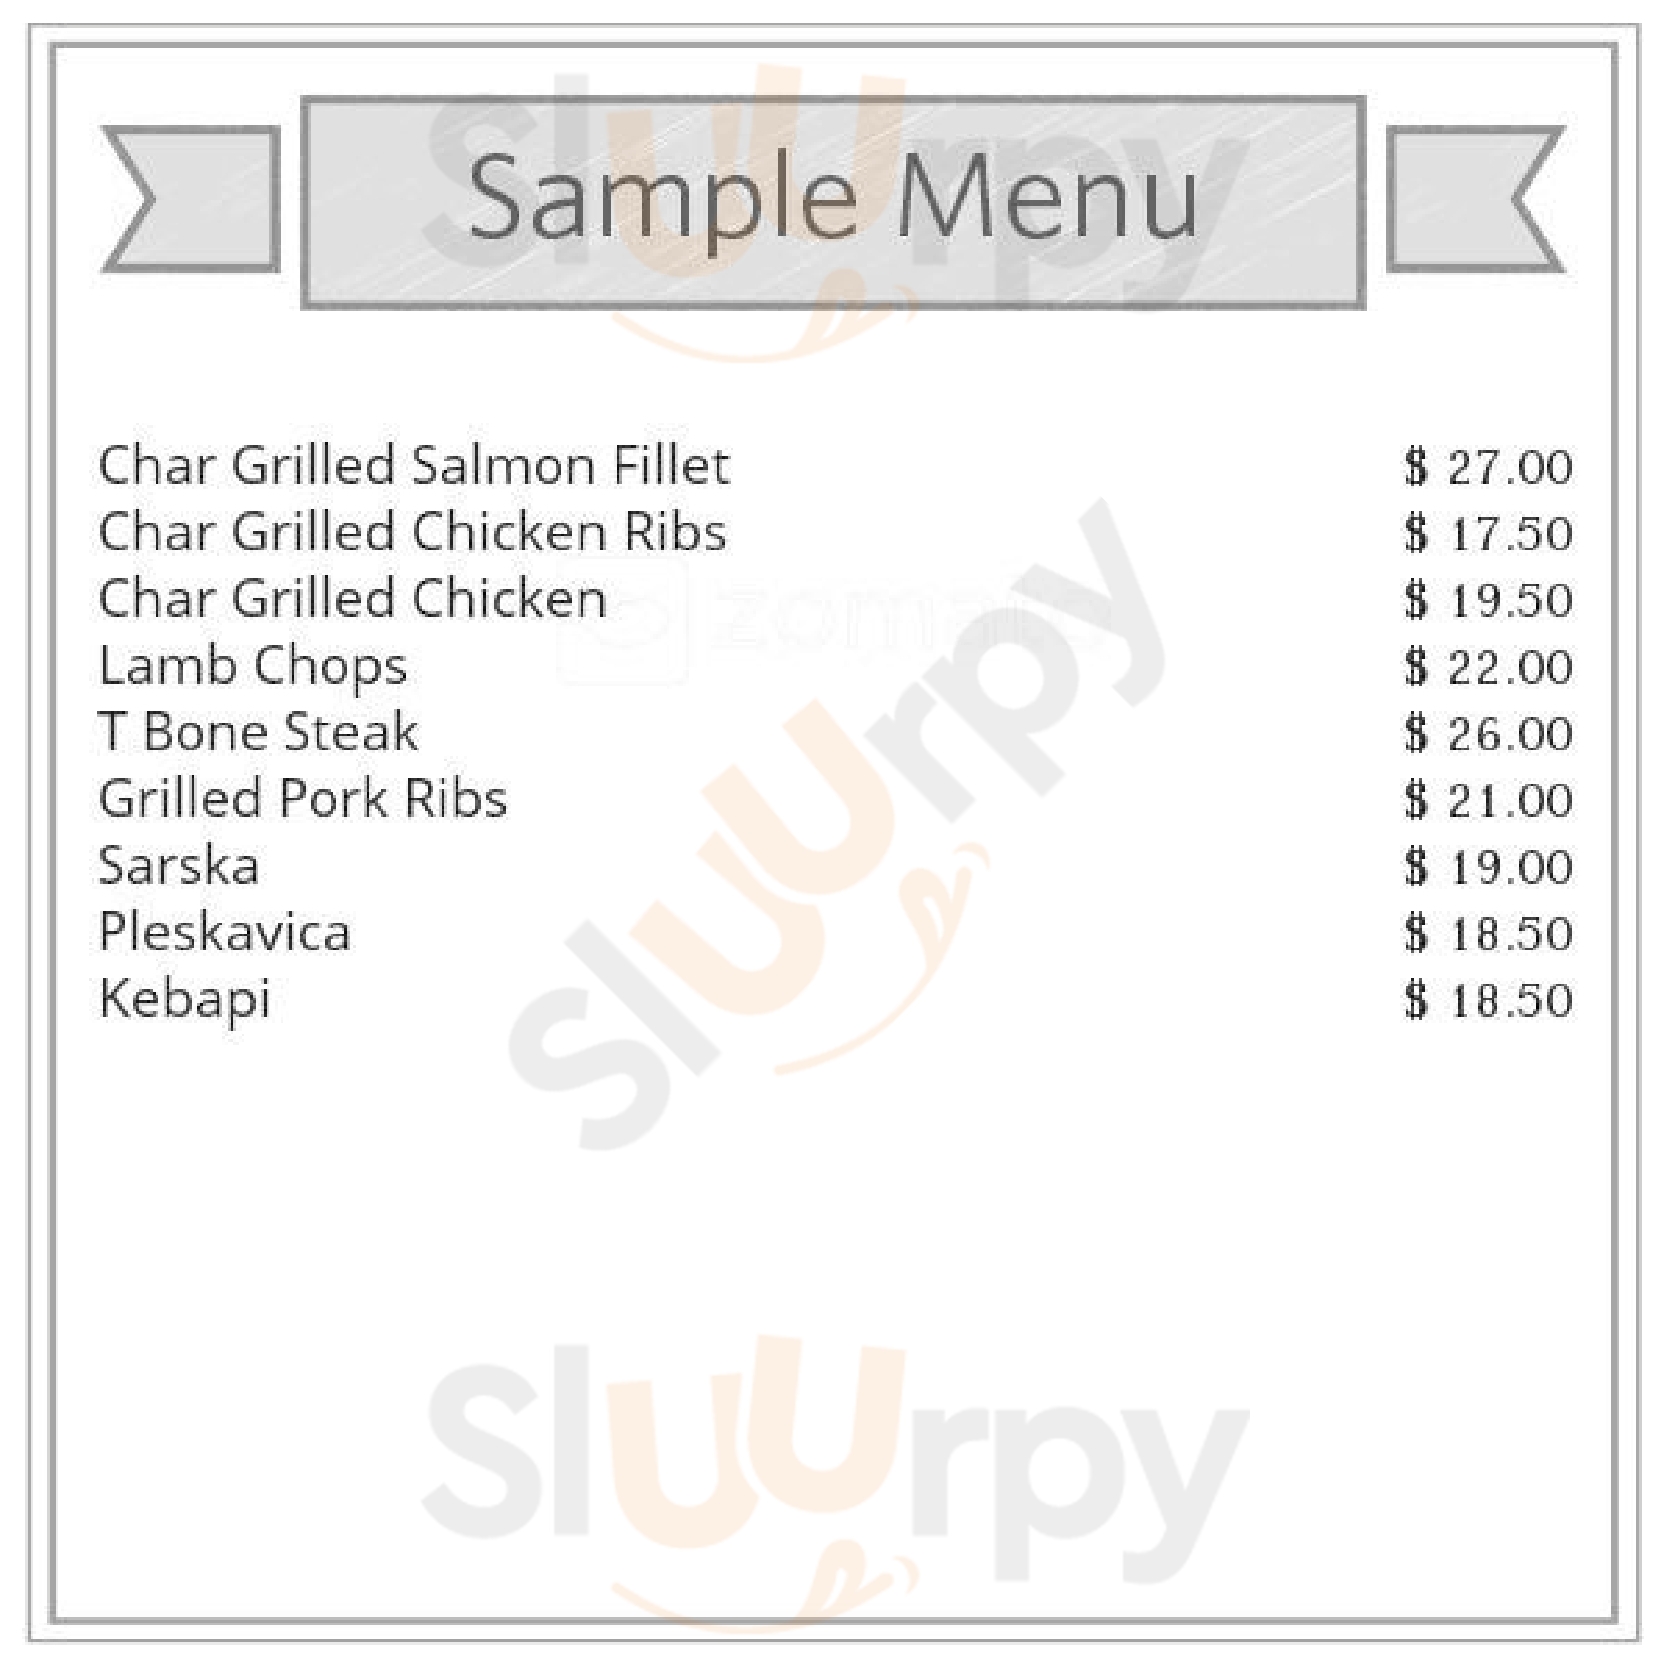 D.d's Charcoal Grill Epping Menu - 1